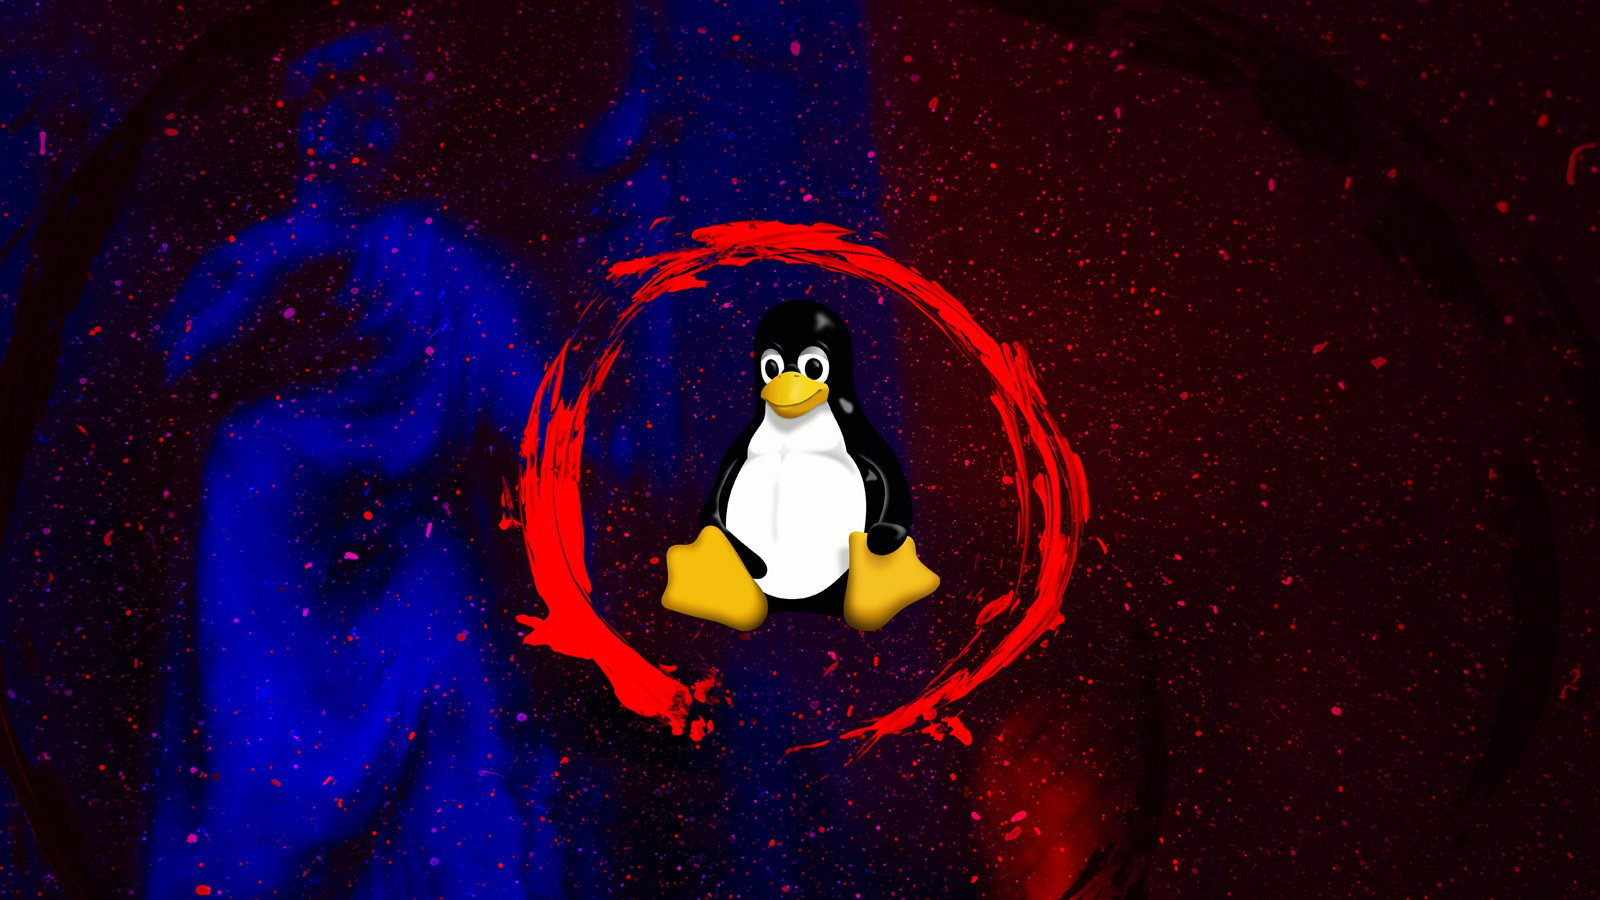 Exploits released for Linux flaw giving root on major distros – Source: www.bleepingcomputer.com